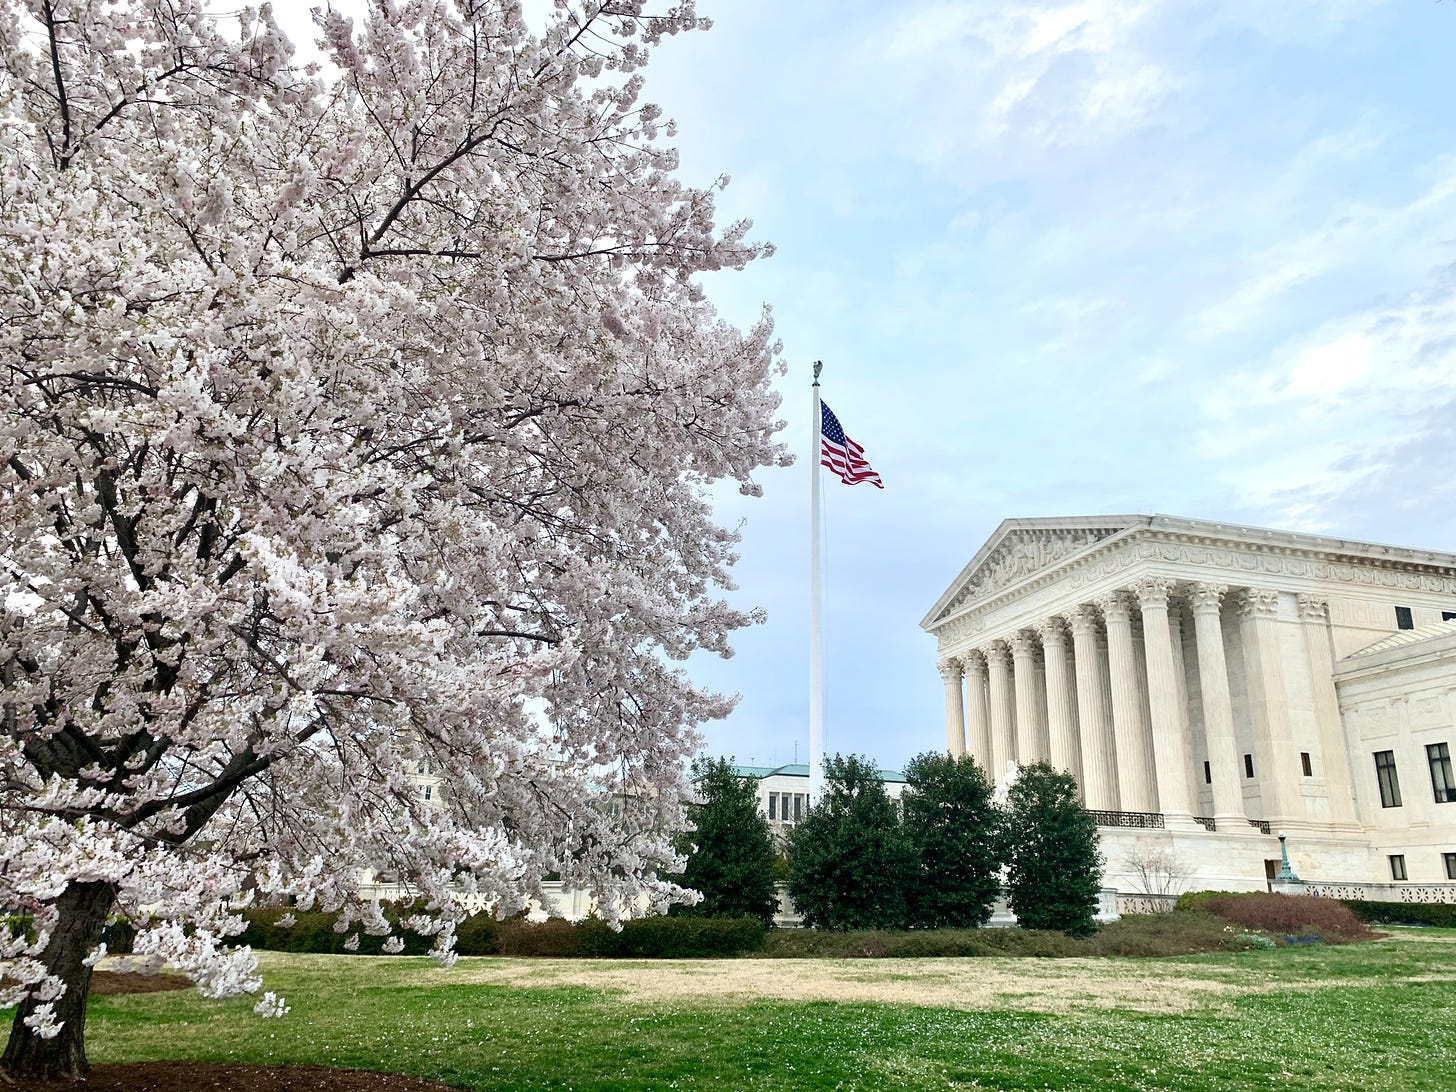 Picture of Supreme Court of the USA on the right, American flag flying in the middle, with a classic cherry blossom tree on the left.